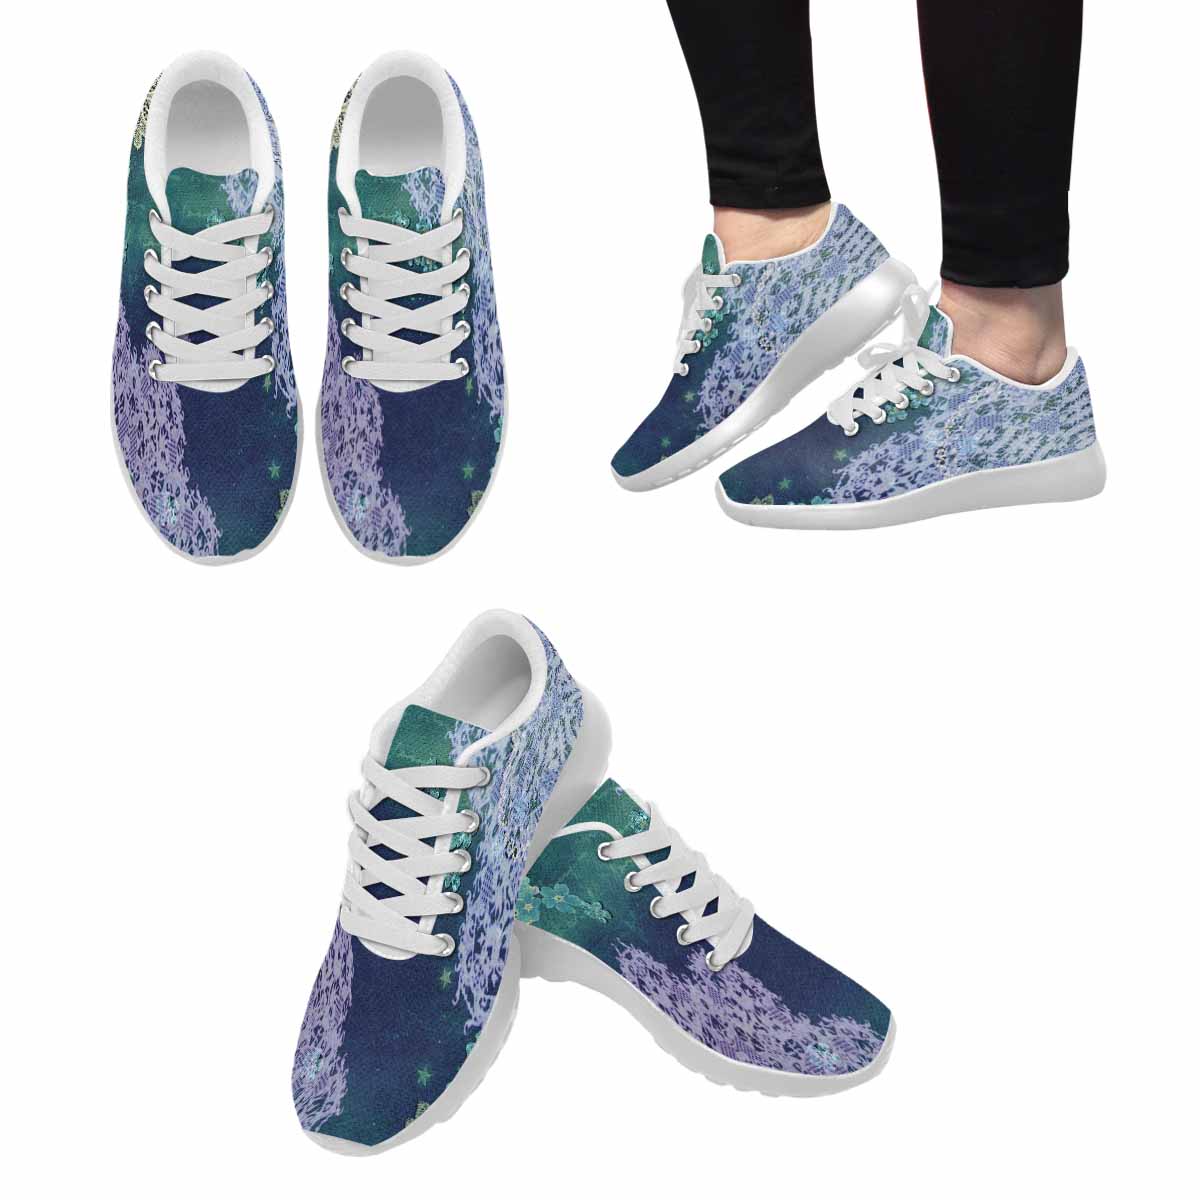 Victorian lace print, womens cute casual or running sneakers, design 05